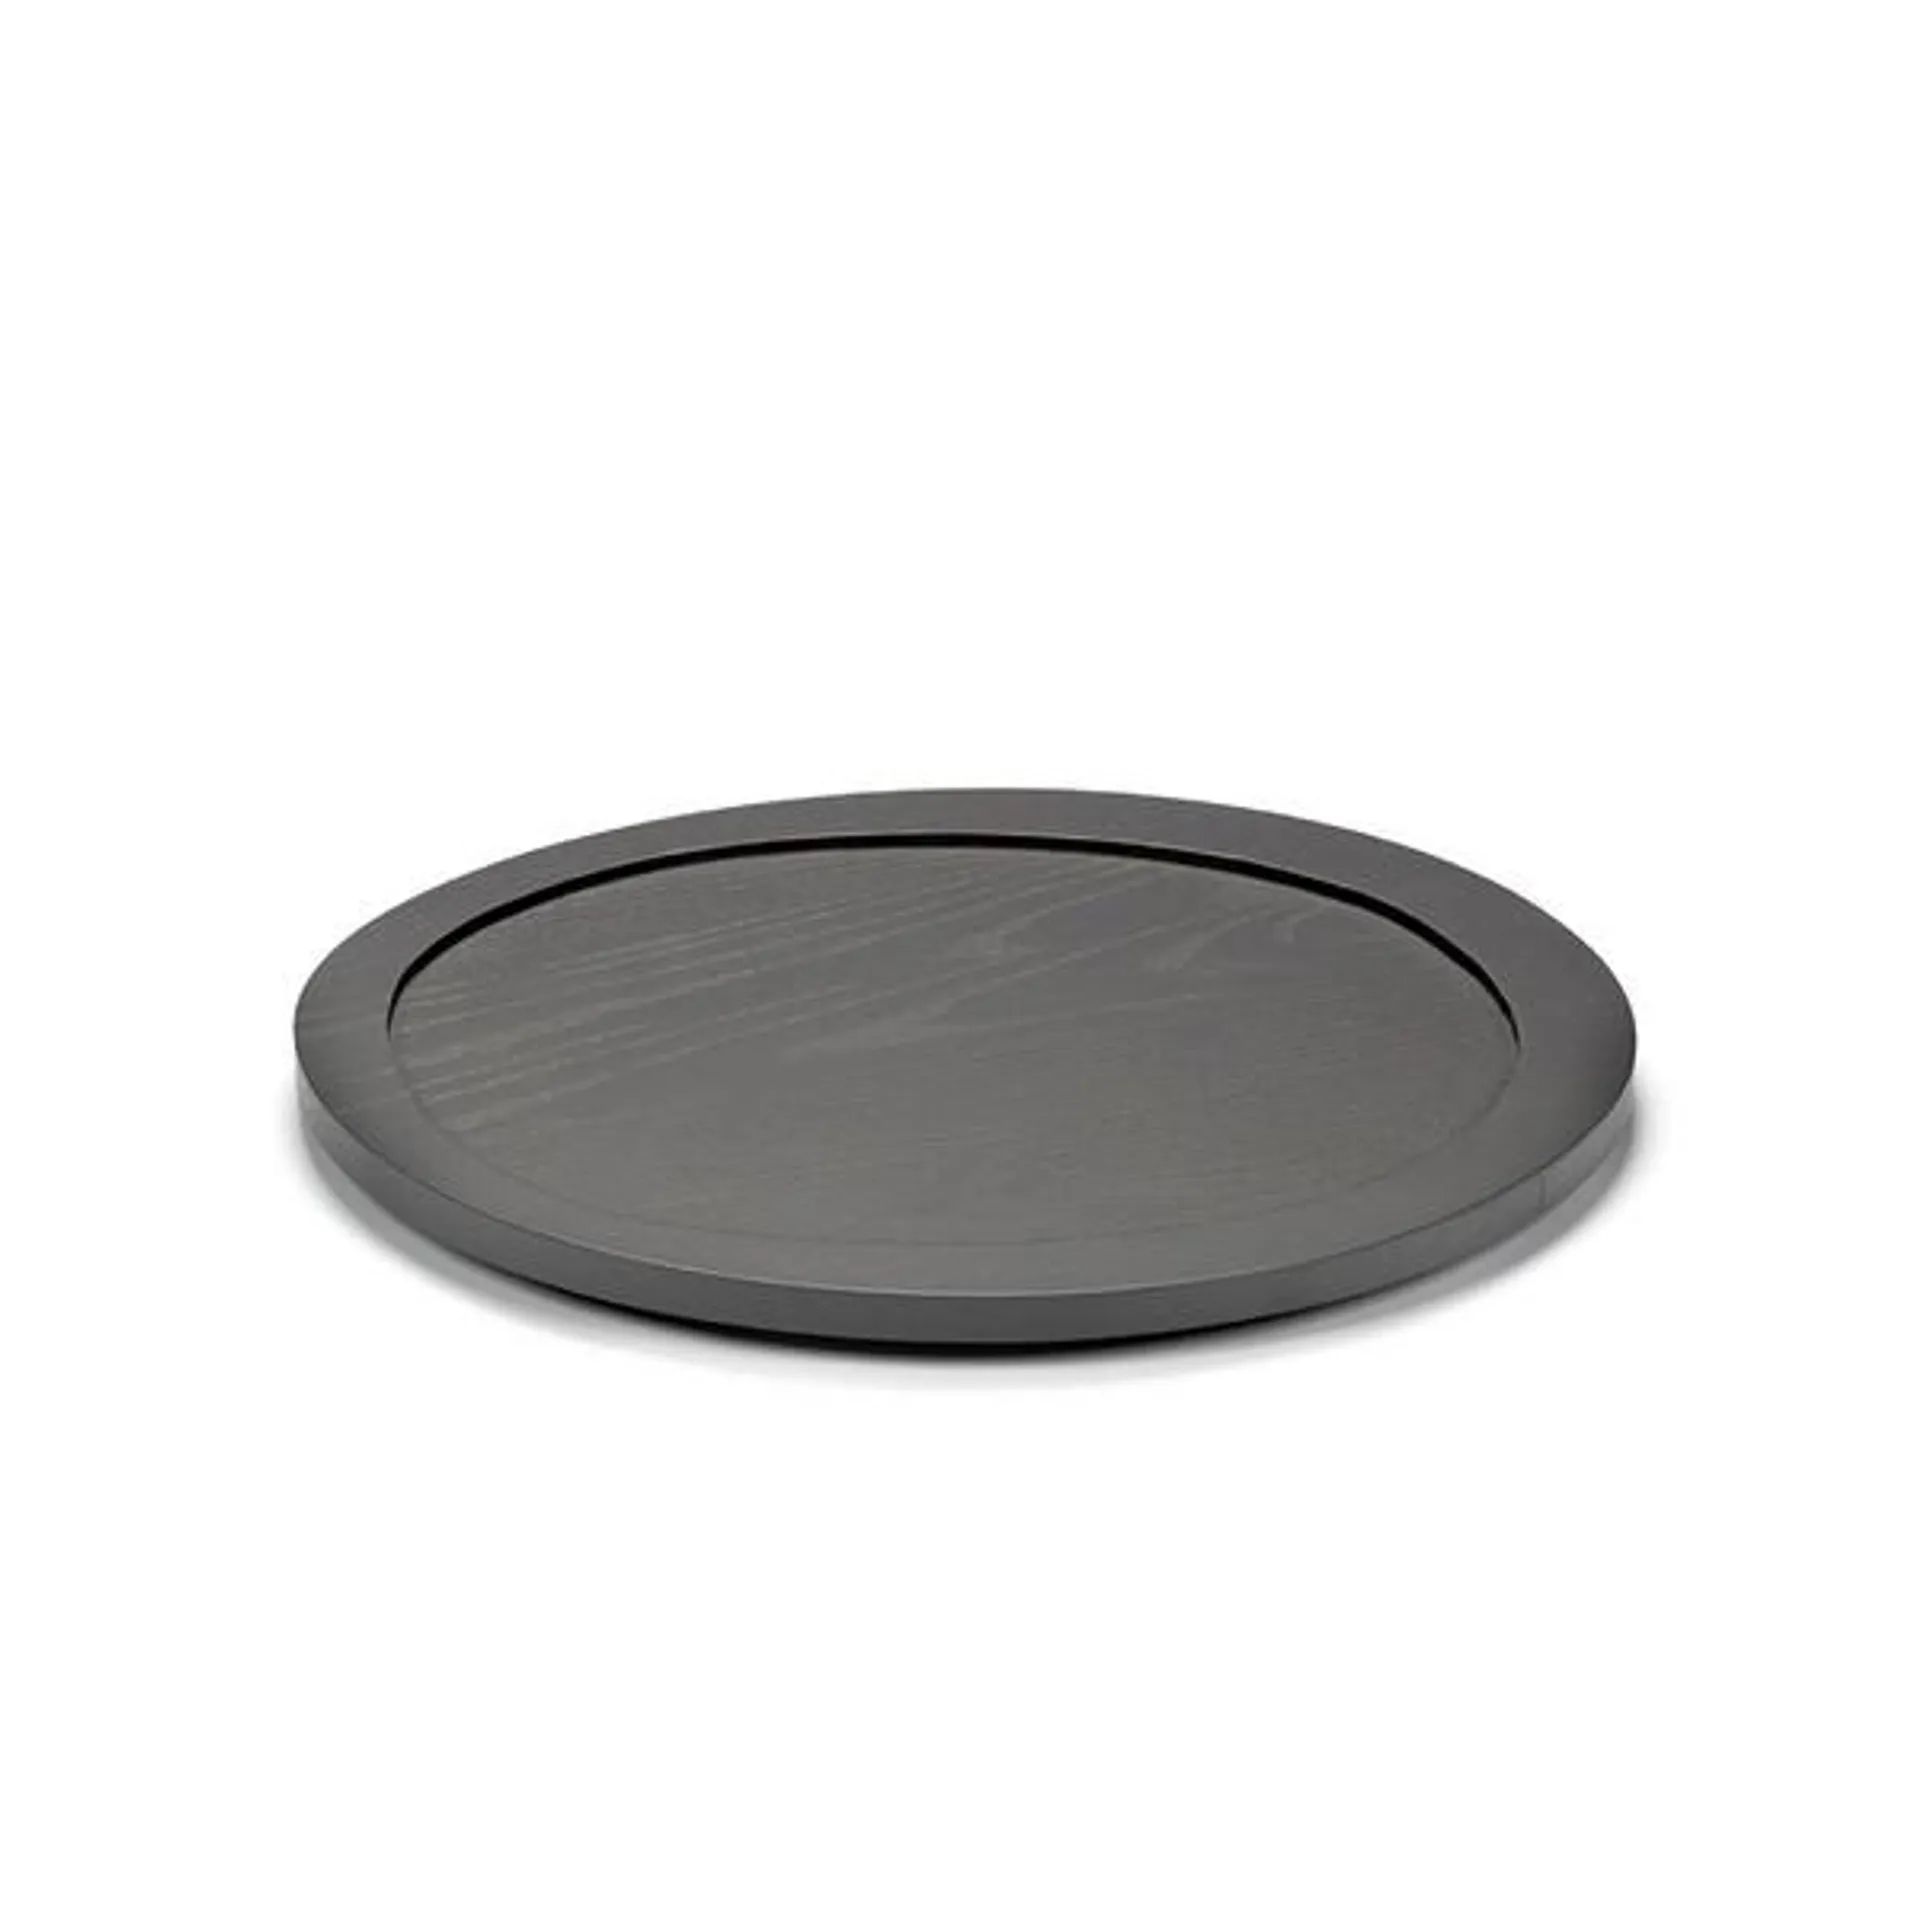 Valerie Objects Inner Circle Large Tray Grey V9020102G